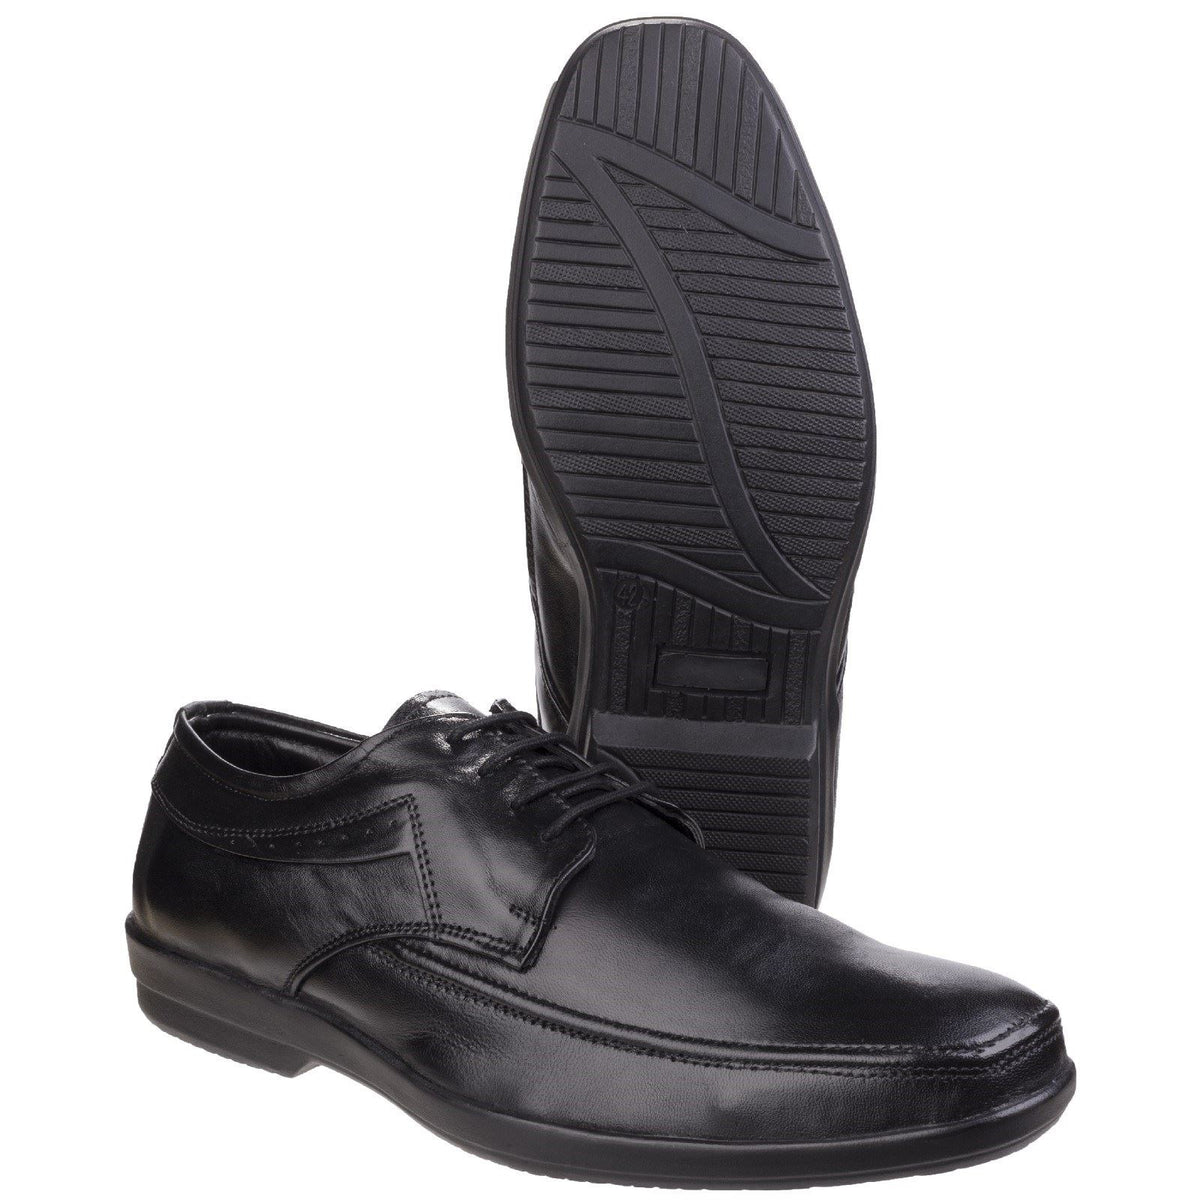 Fleet & Foster Dave Apron Toe Oxford Formal Shoes